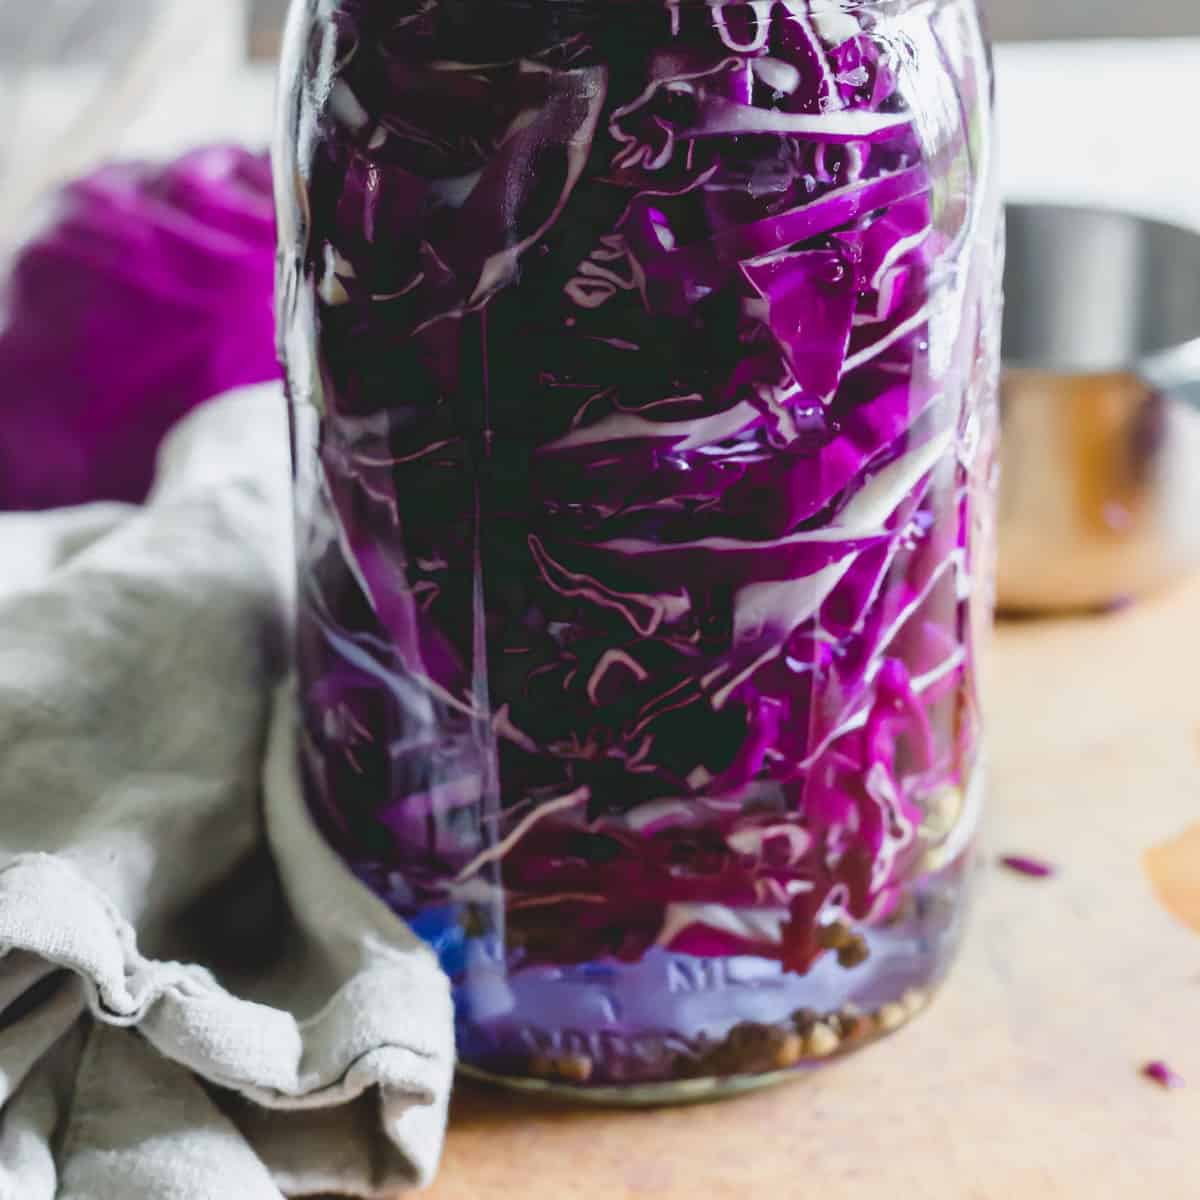 Day 1 of fermented red cabbage in a mason jar.